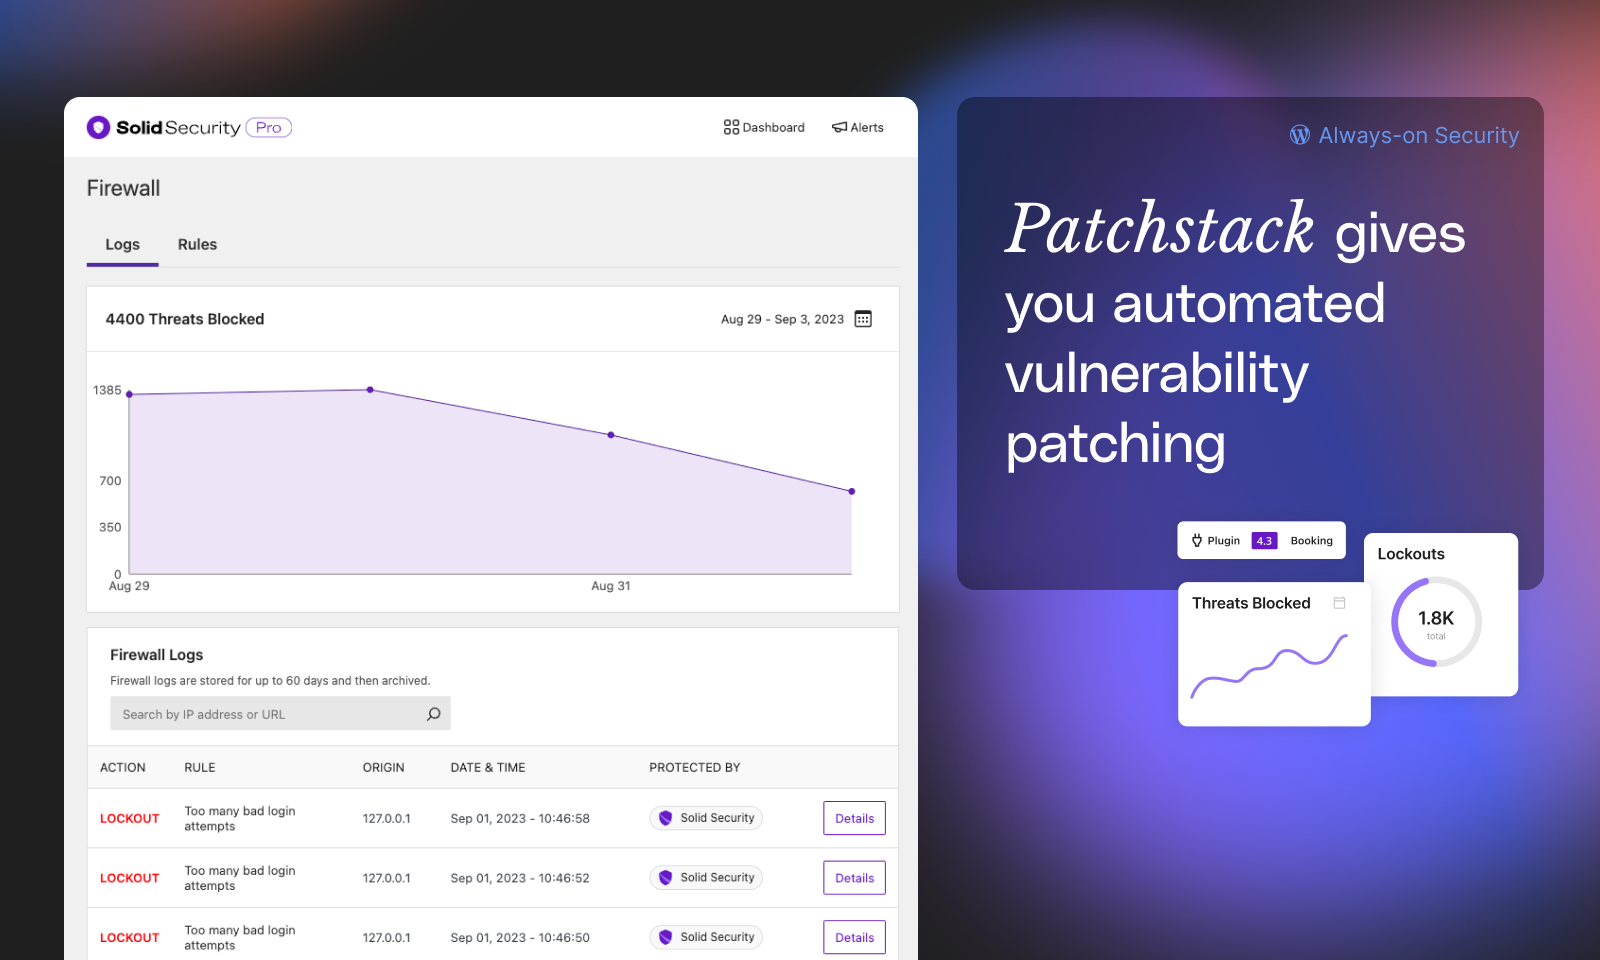 Patchstack